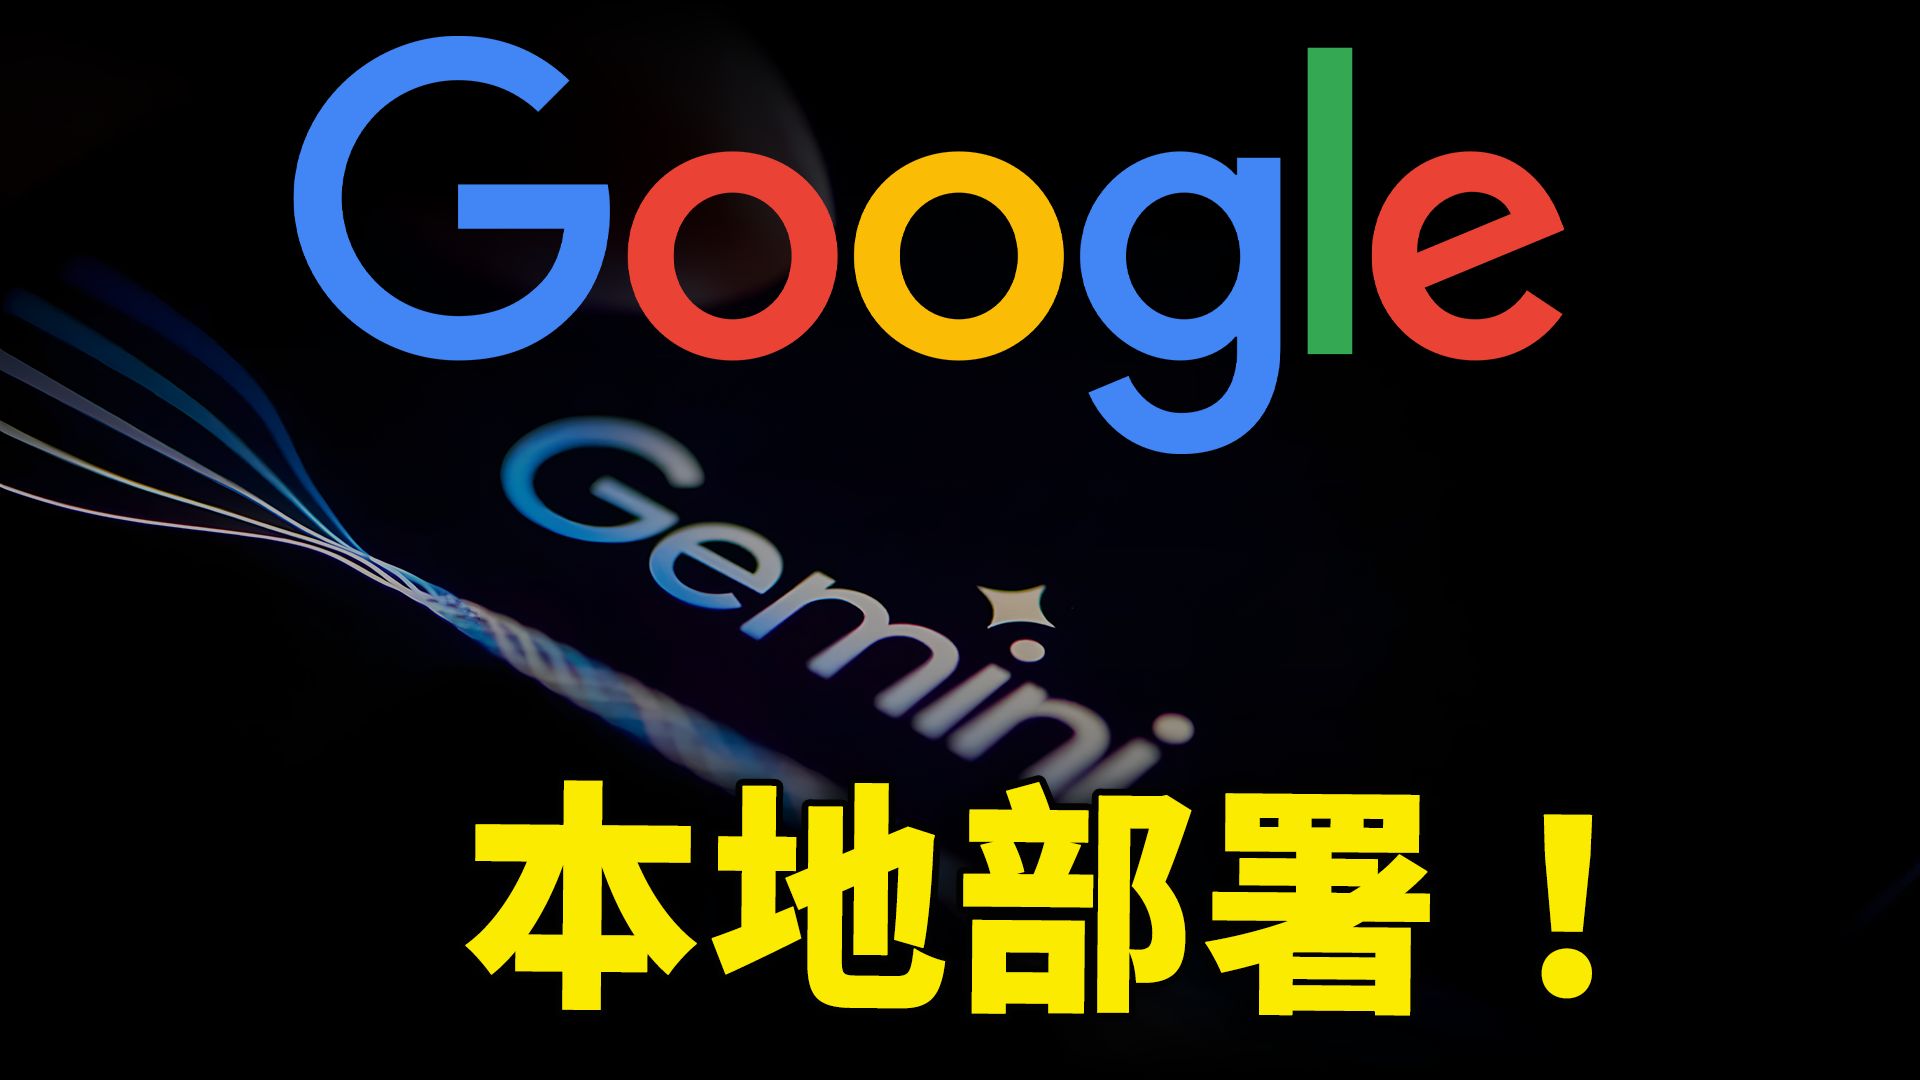 Google Gemini gets us closer to the AI of our imagination, and it's going to change everything ...